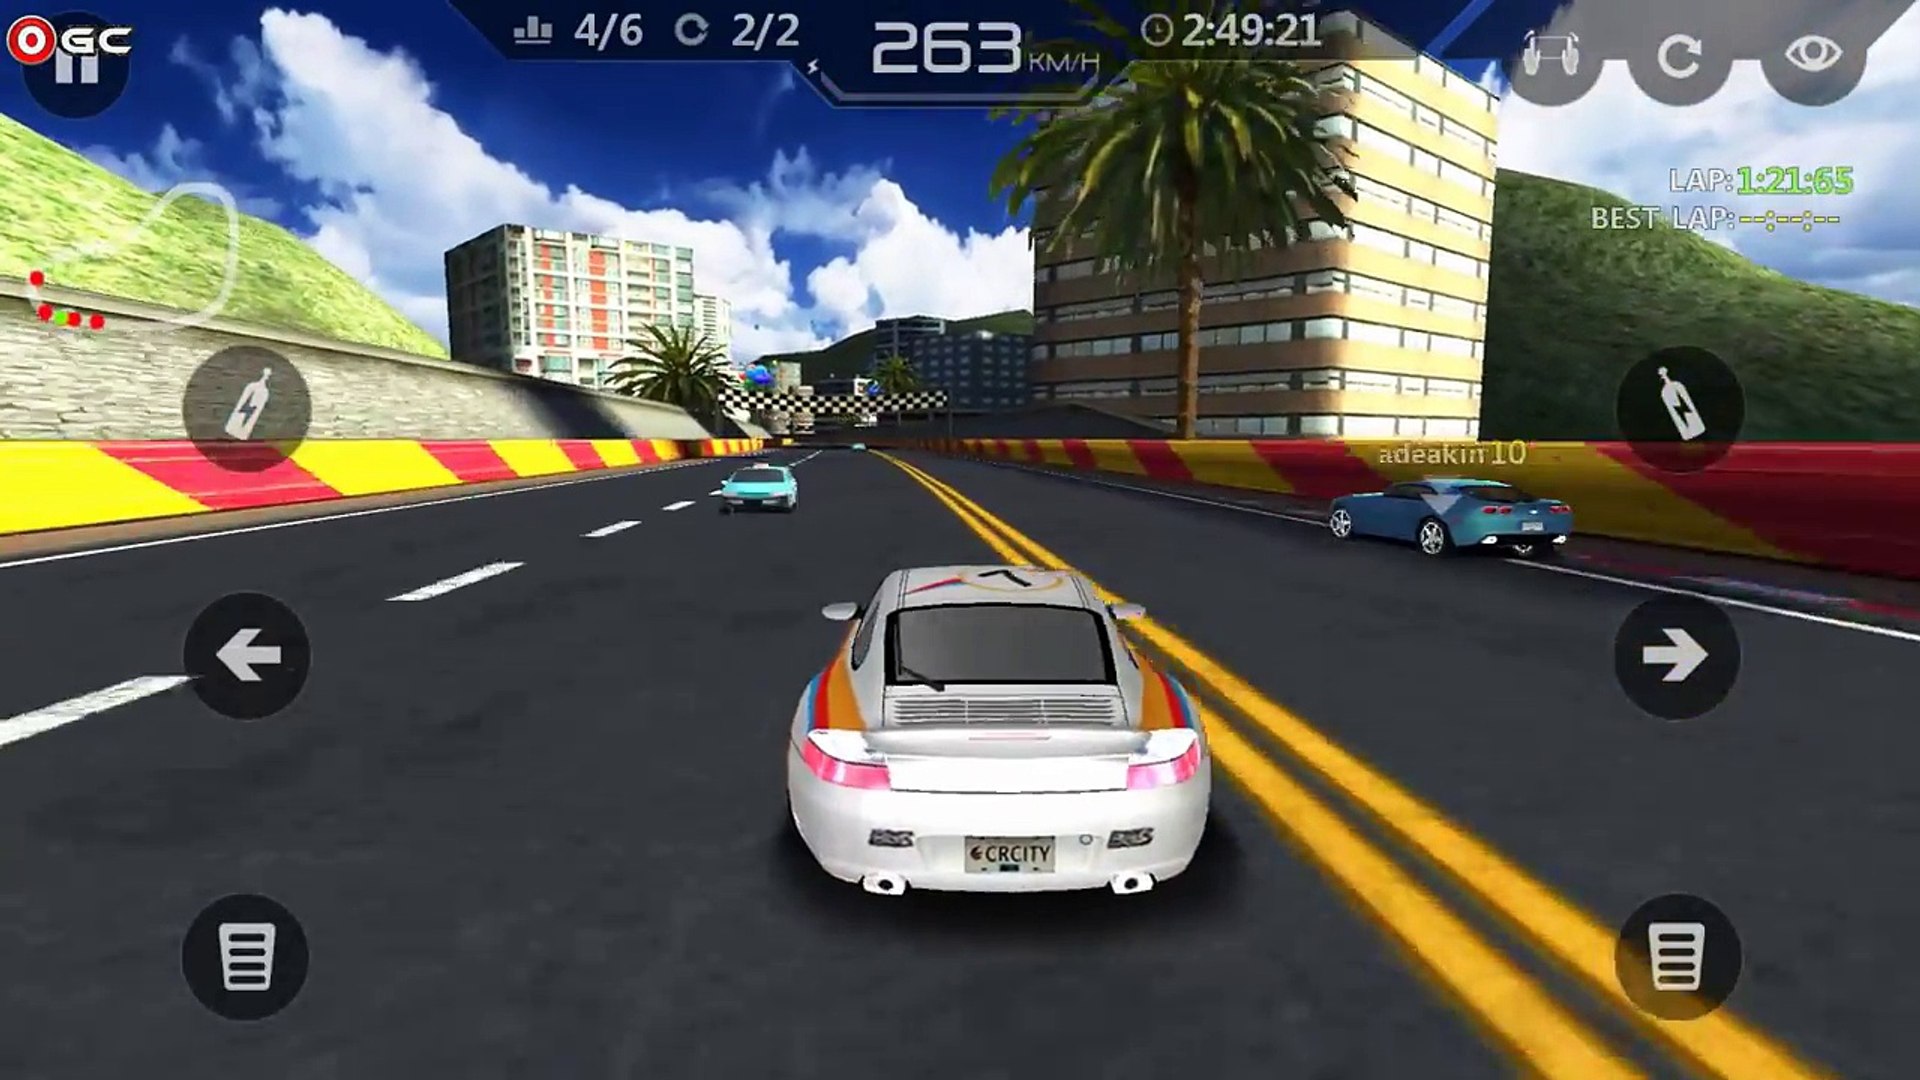 Real Sports Racing Car Games - Stunts Car Drift Games - Open World Android  GamePlay - Vidéo Dailymotion